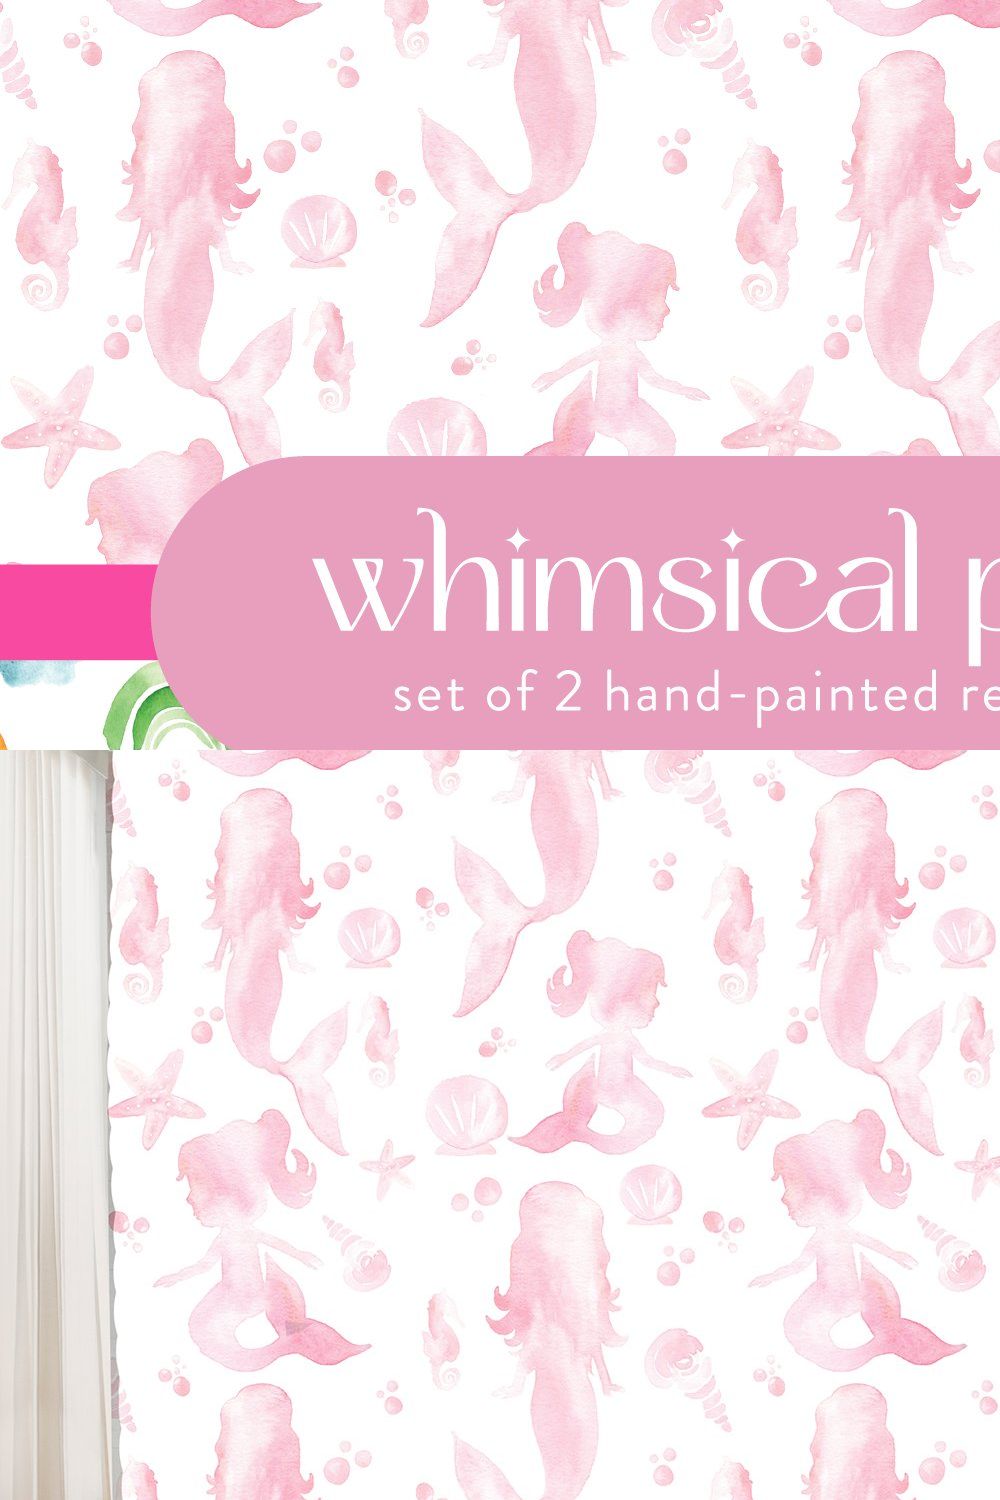 Whimsical Patterns pinterest preview image.